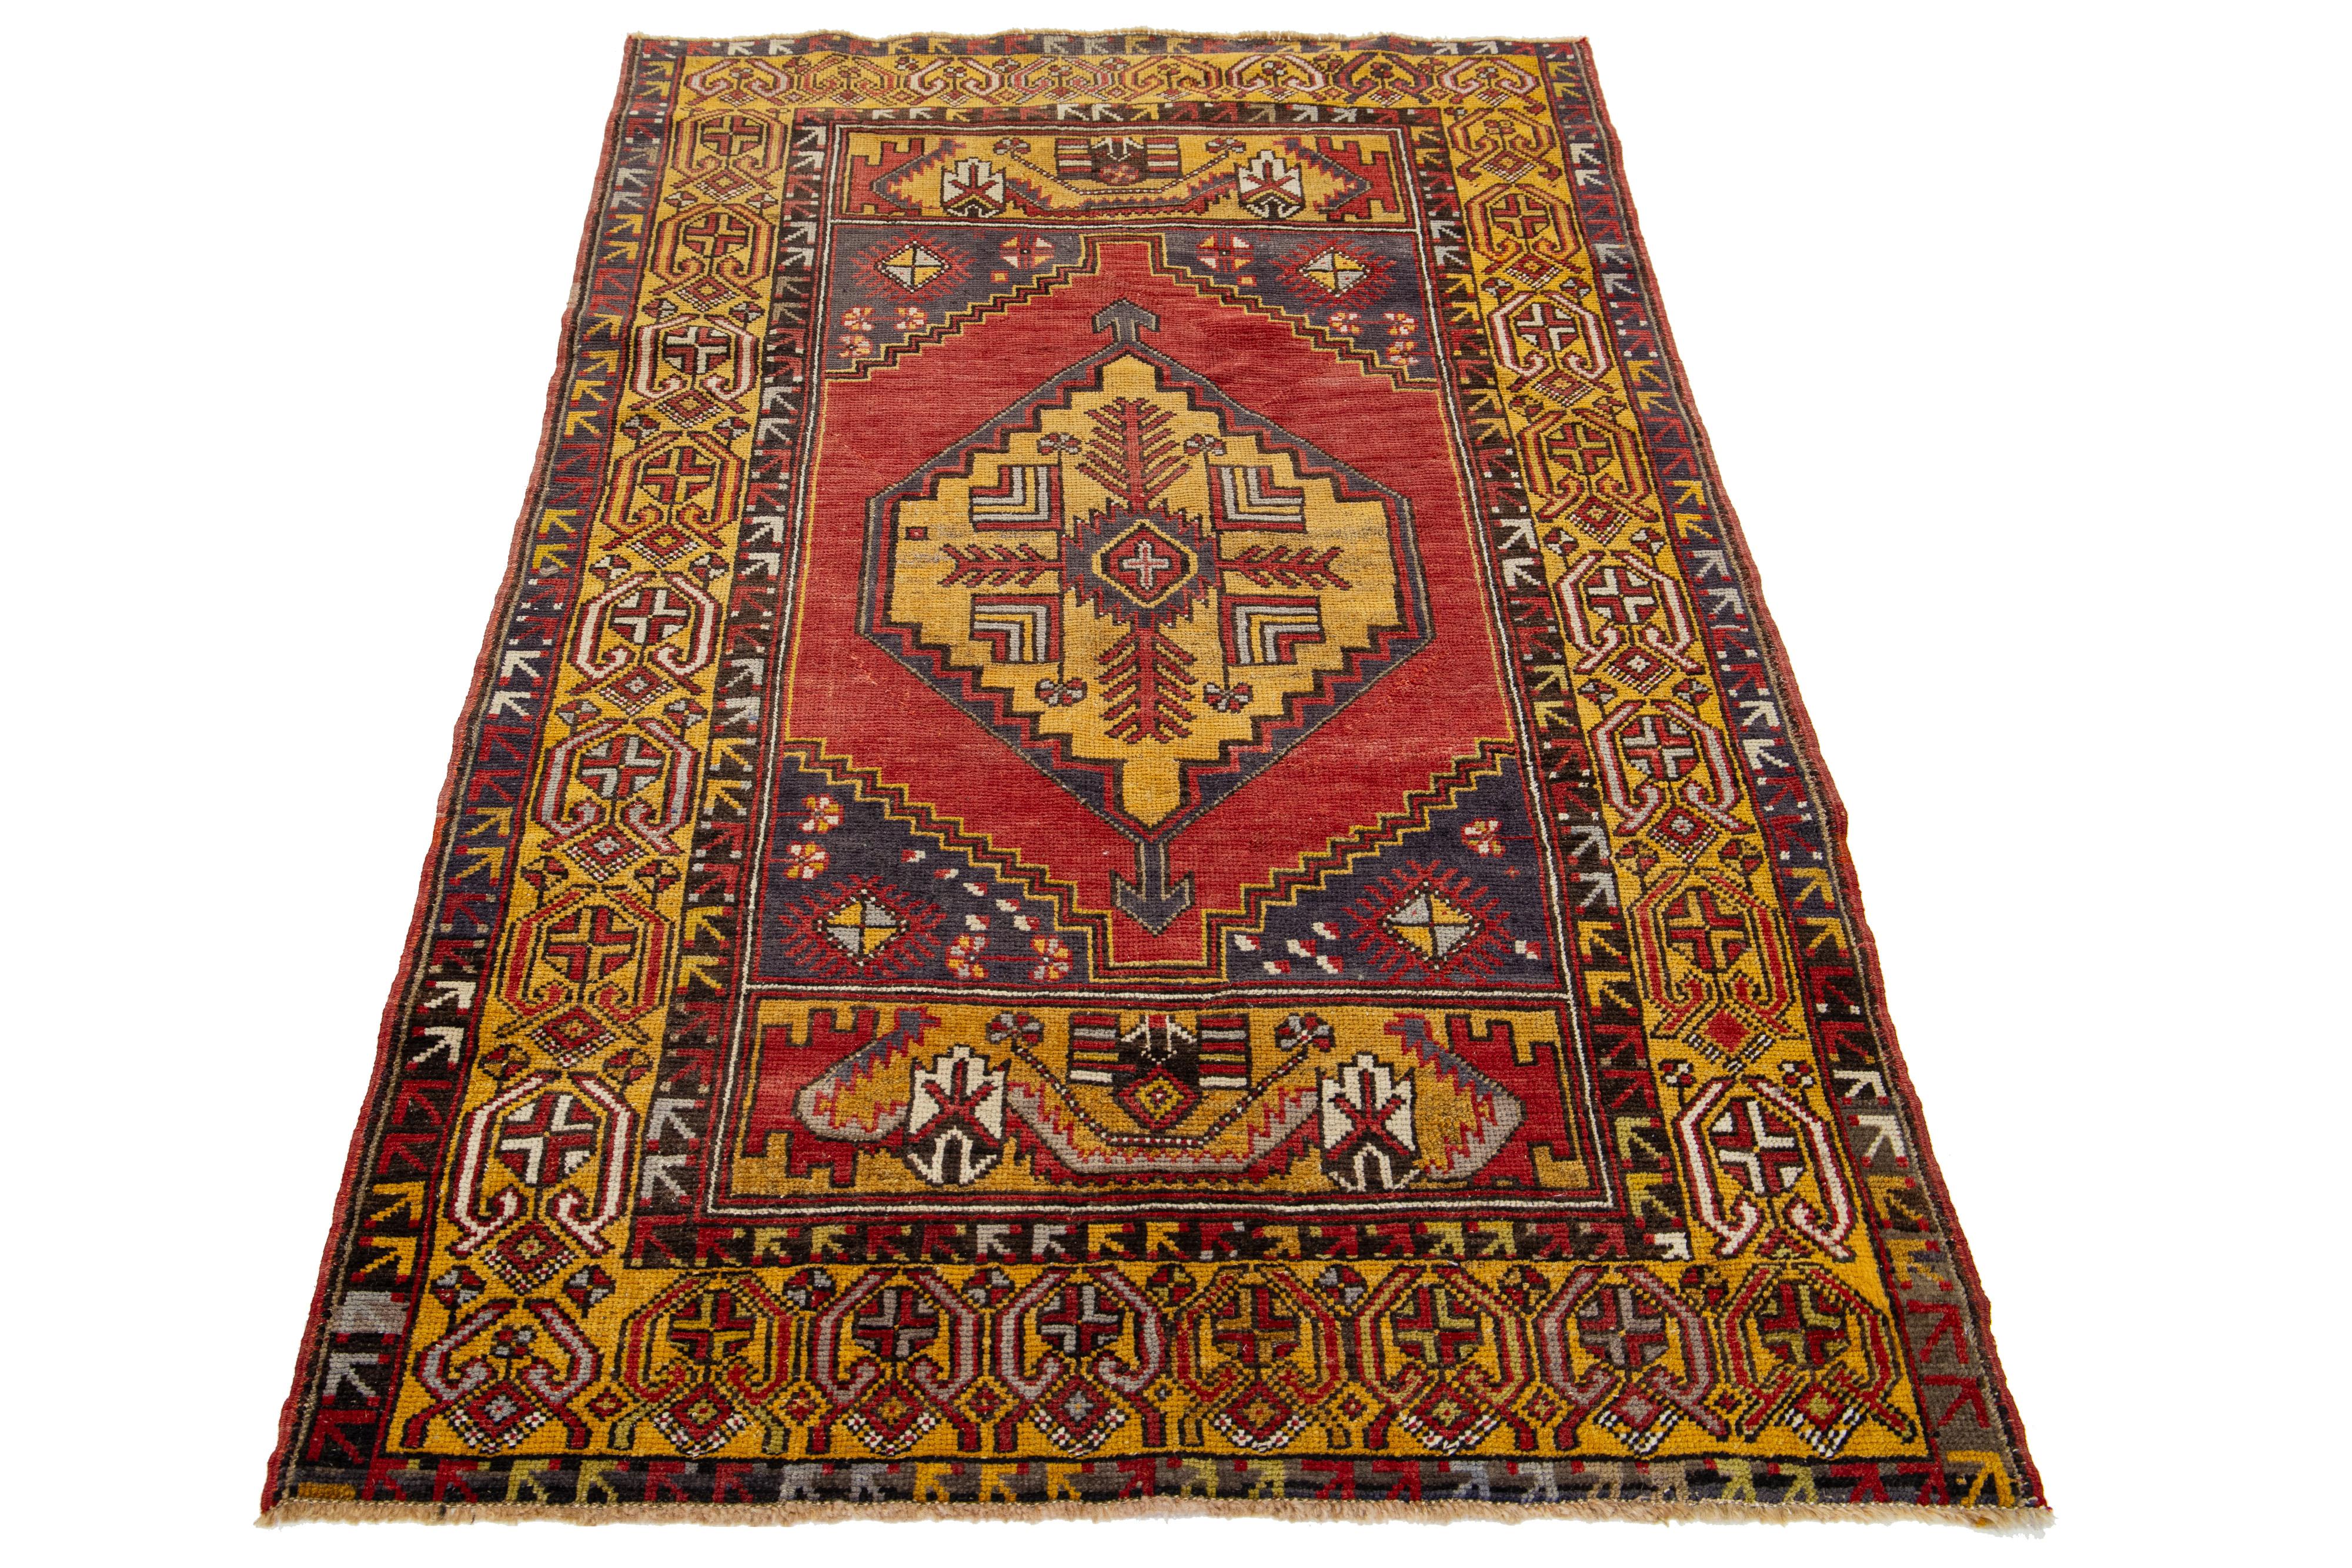 A vintage Anatolian rug, hand-knotted, featuring a geometric design displayed on a red field, bordered by yellow sections, and adorned with blue hues.

This rug measures 3'8